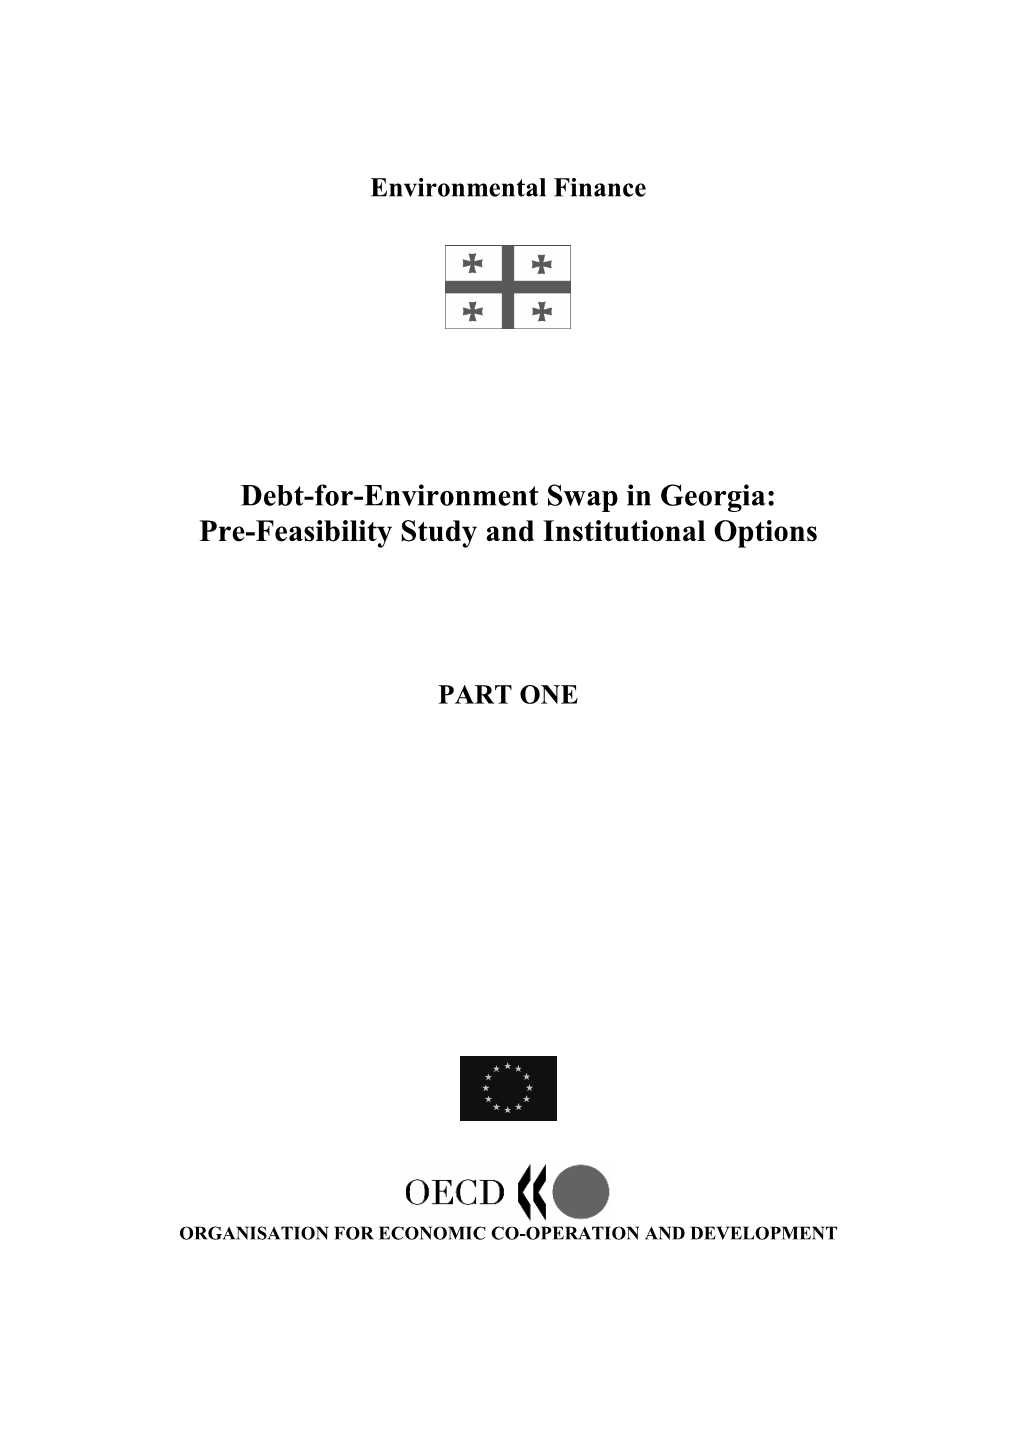 Debt-For-Environment Swap in Georgia: Pre-Feasibility Study and Institutional Options